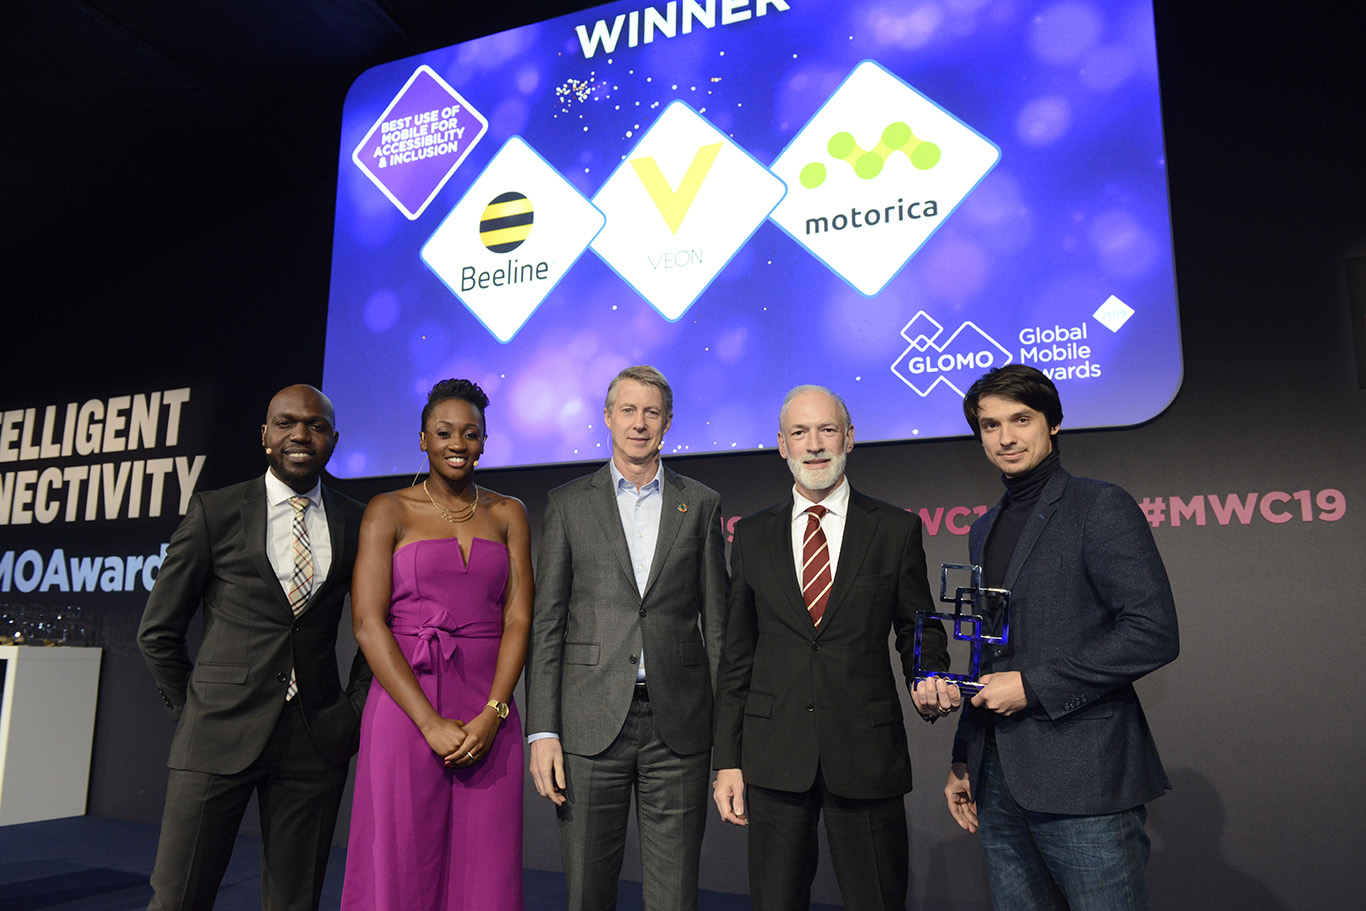 Photo of the Beeline and Motorica team accepting their award at the GLOMO Awards